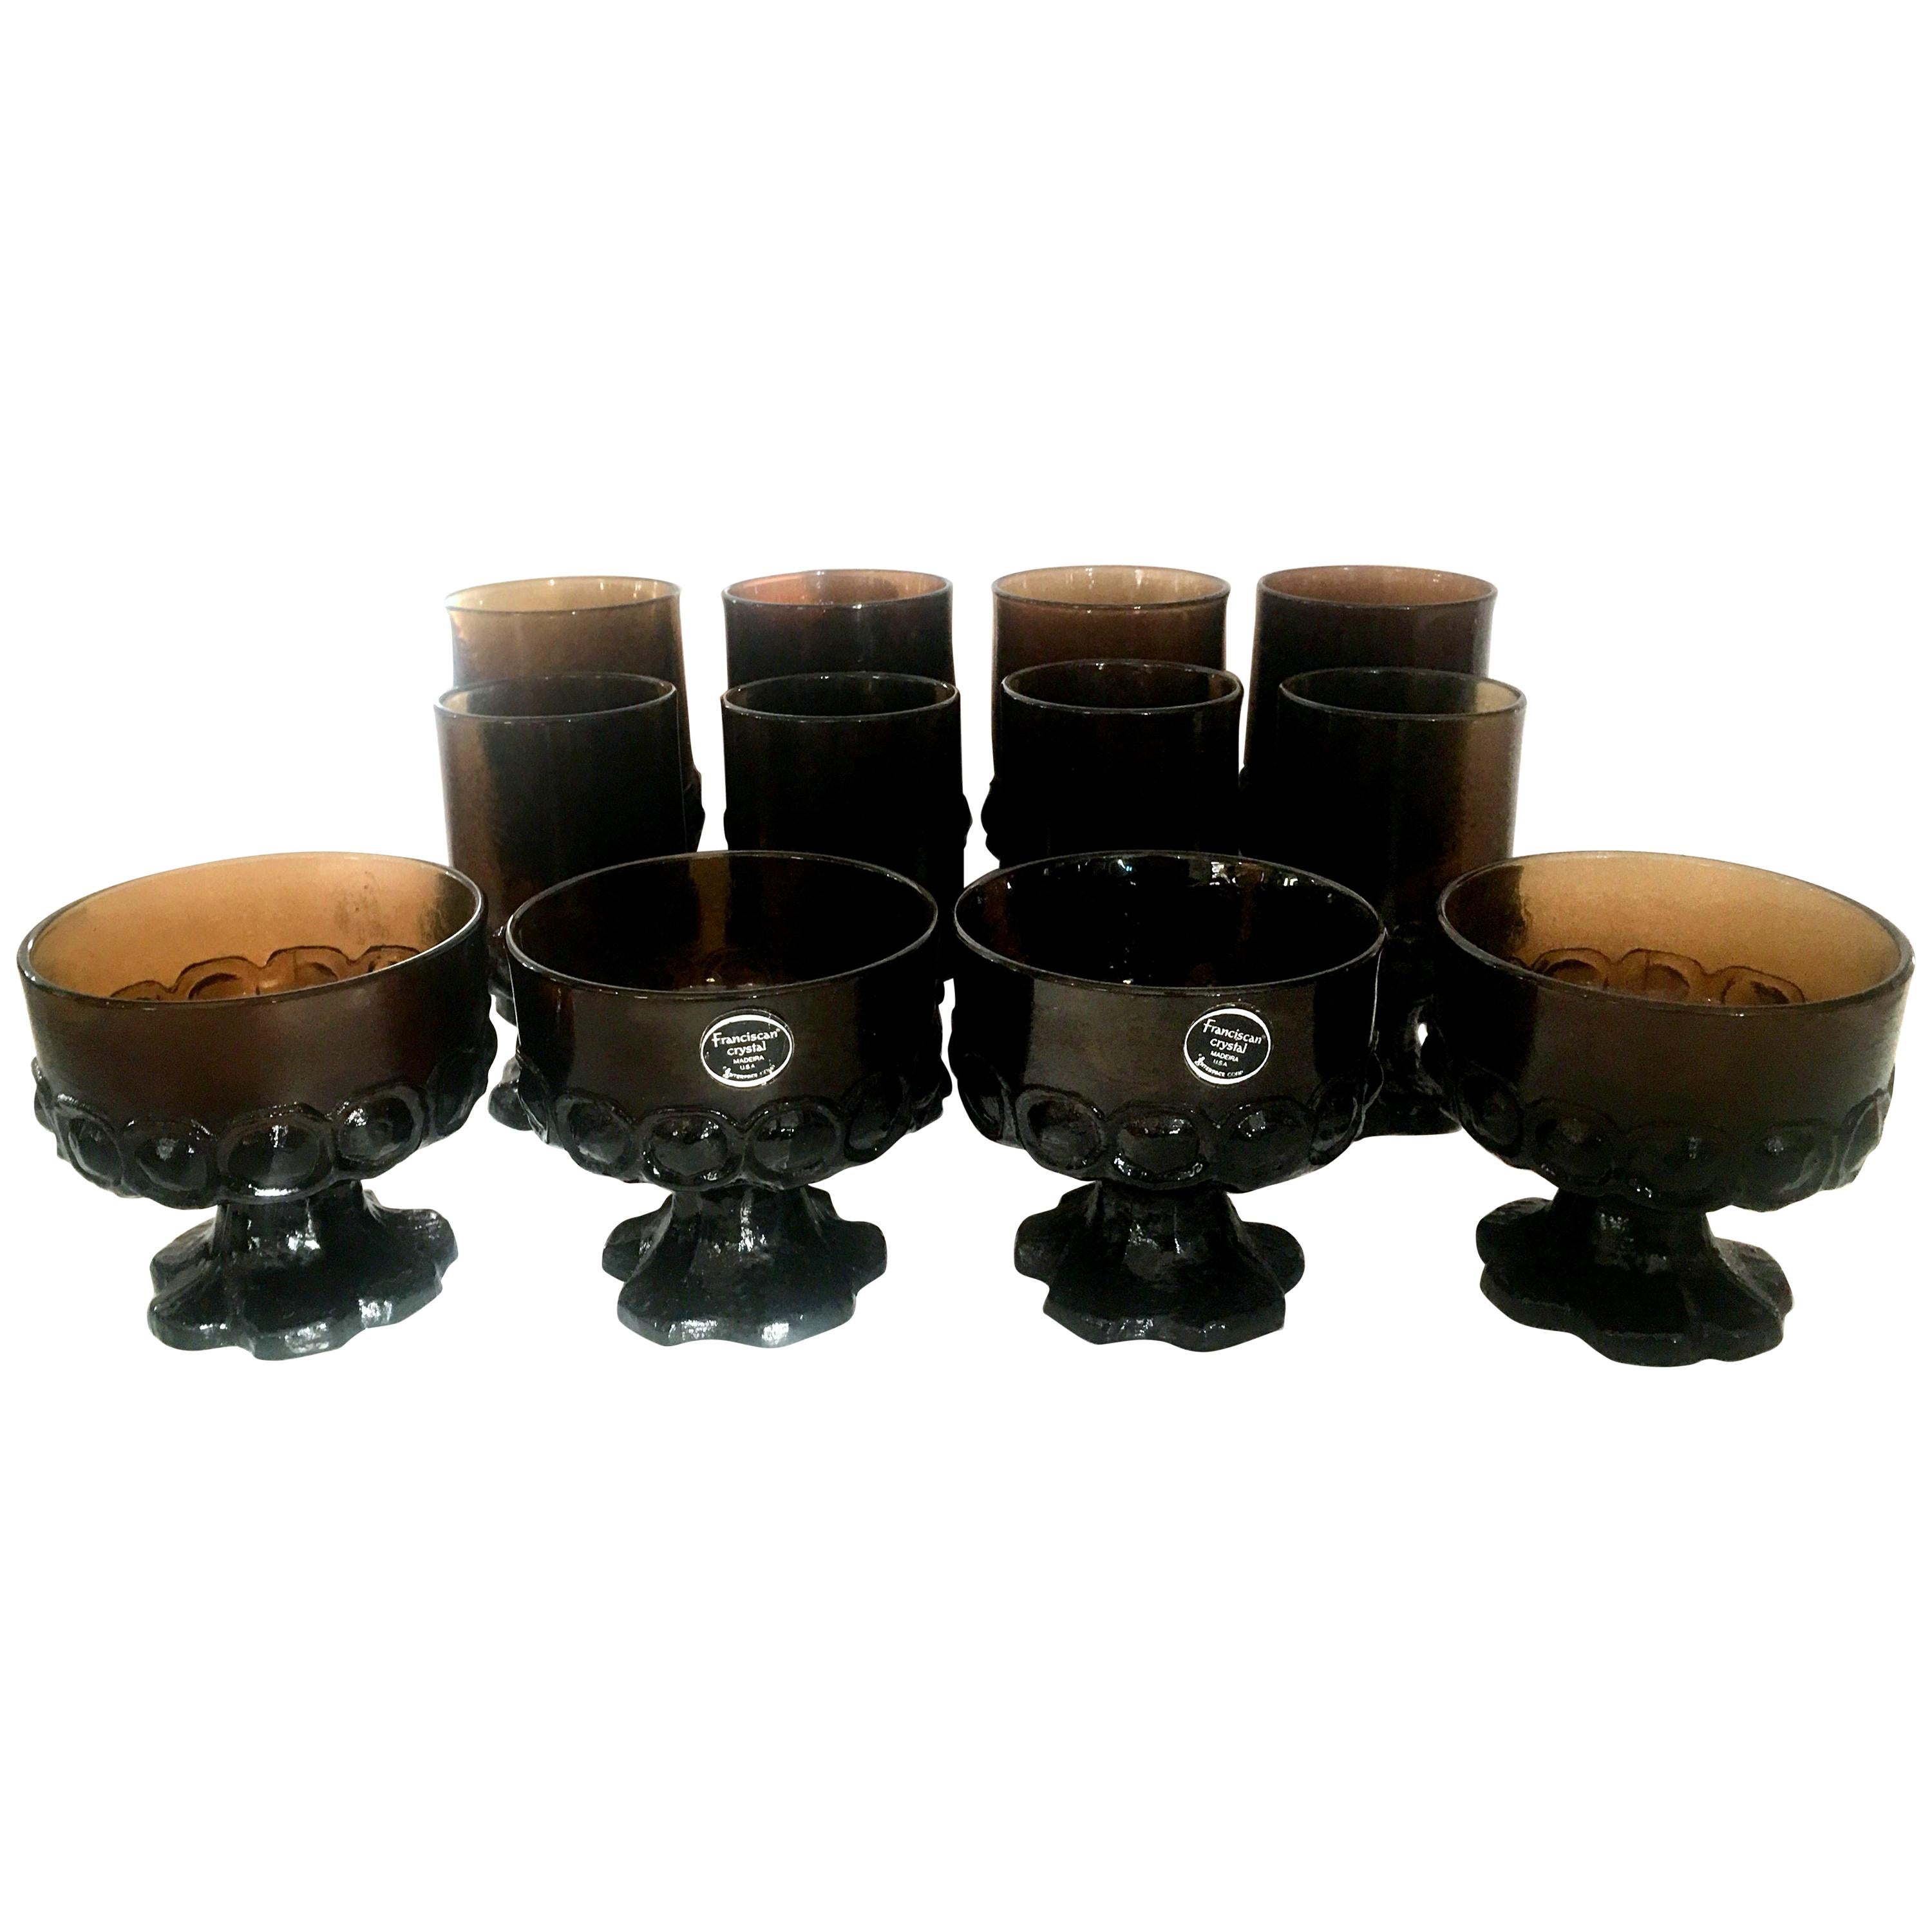 1970s America Blown Glass Footed Stem Drink Glasses by Franciscan, Set of 12